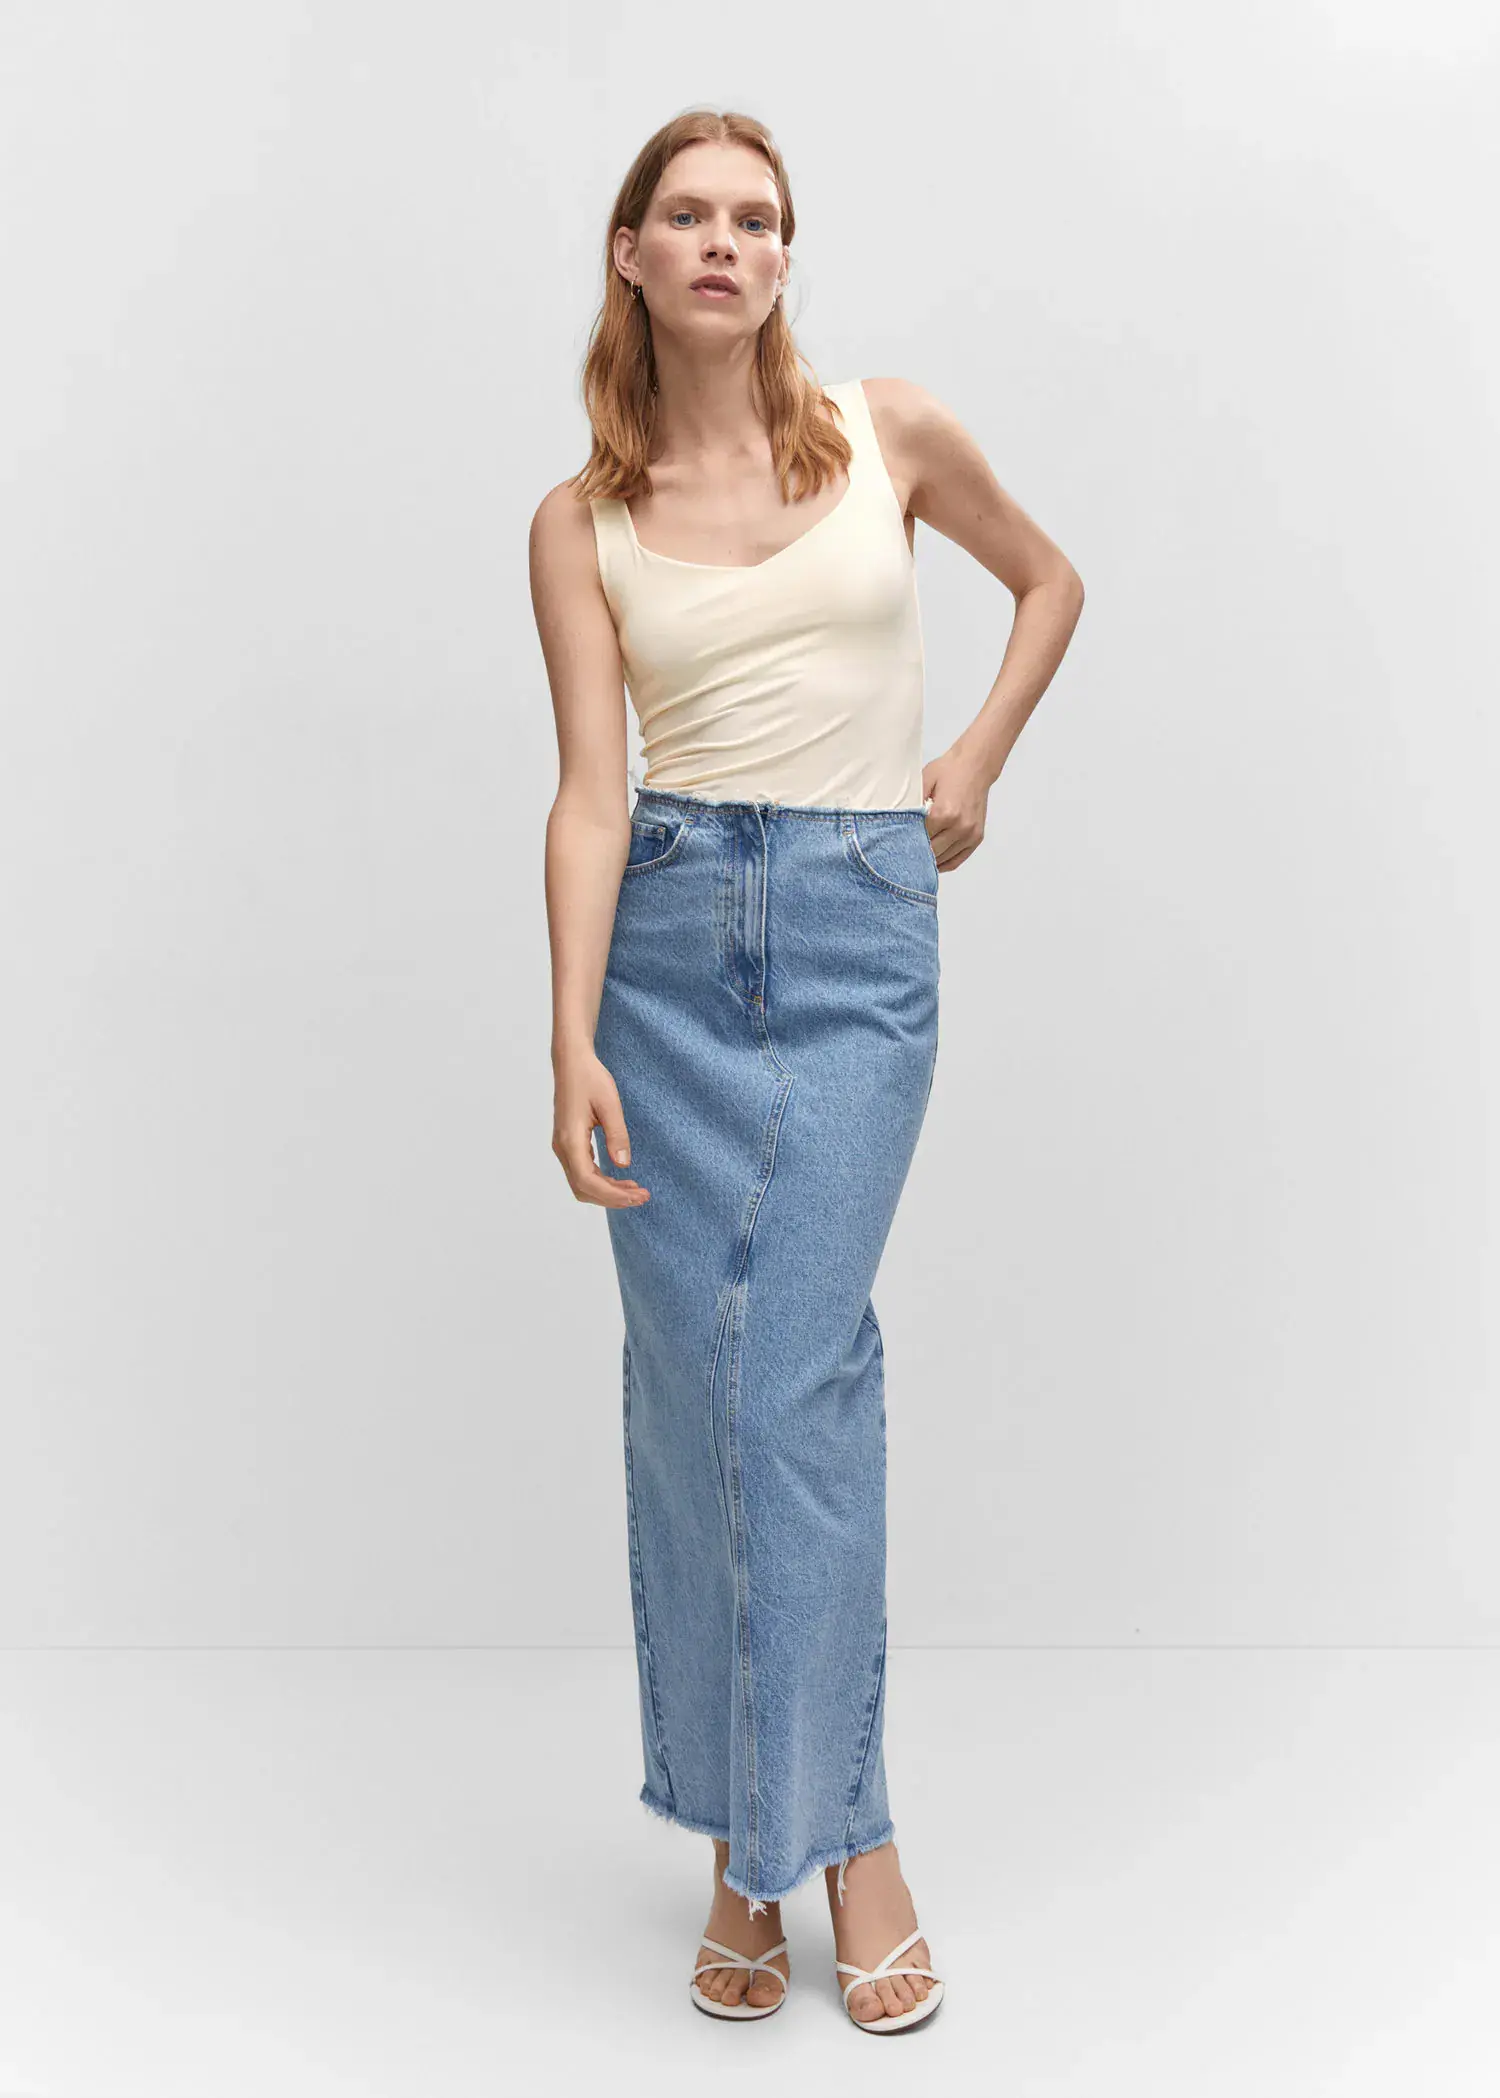 Mango Open elastic top. a woman standing in front of a white wall. 